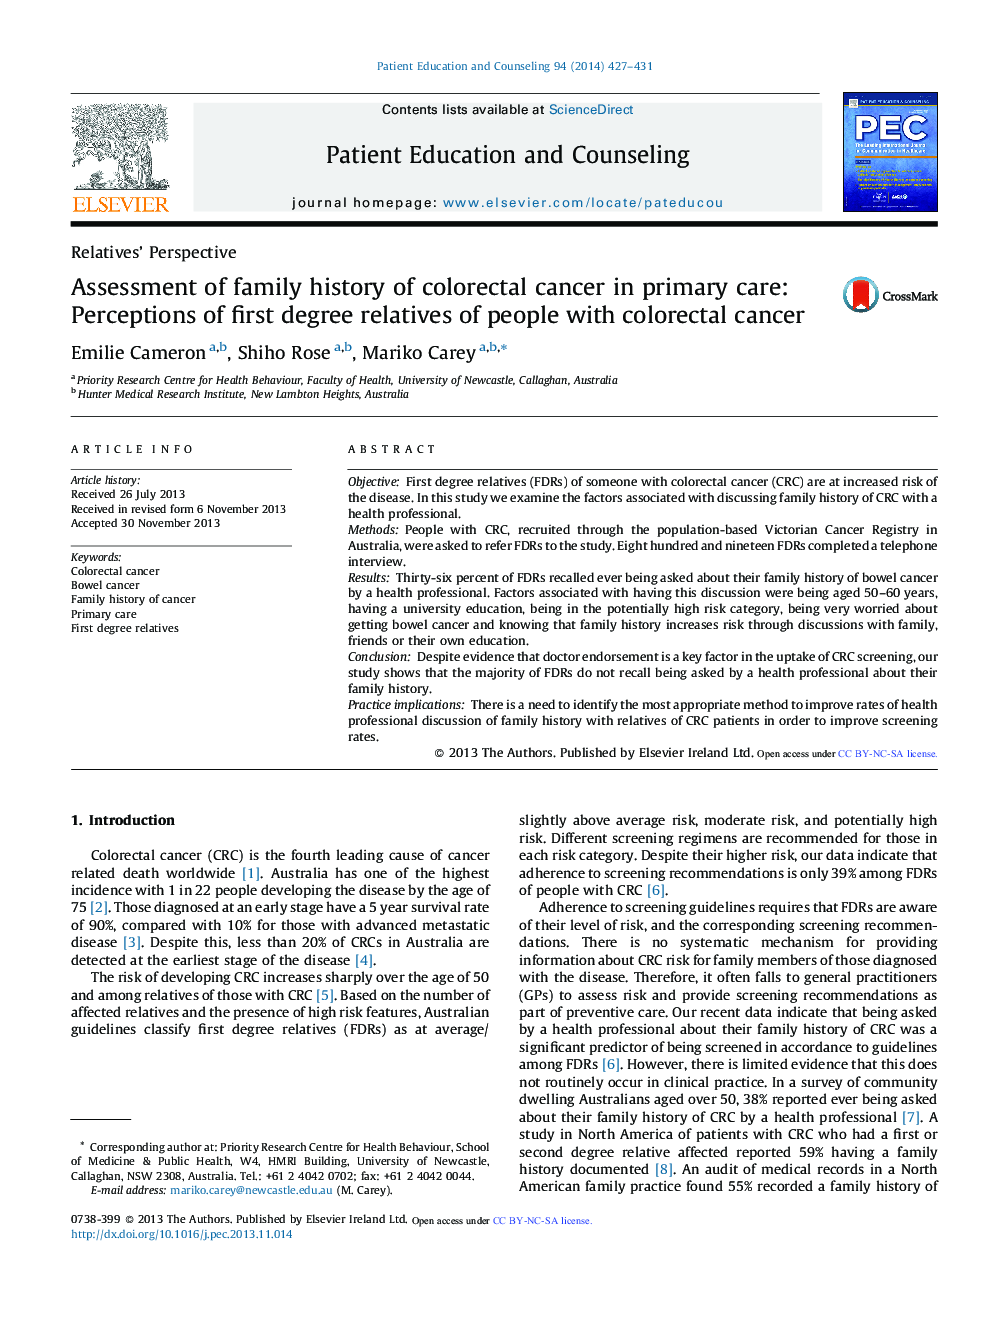 Assessment of family history of colorectal cancer in primary care: Perceptions of first degree relatives of people with colorectal cancer